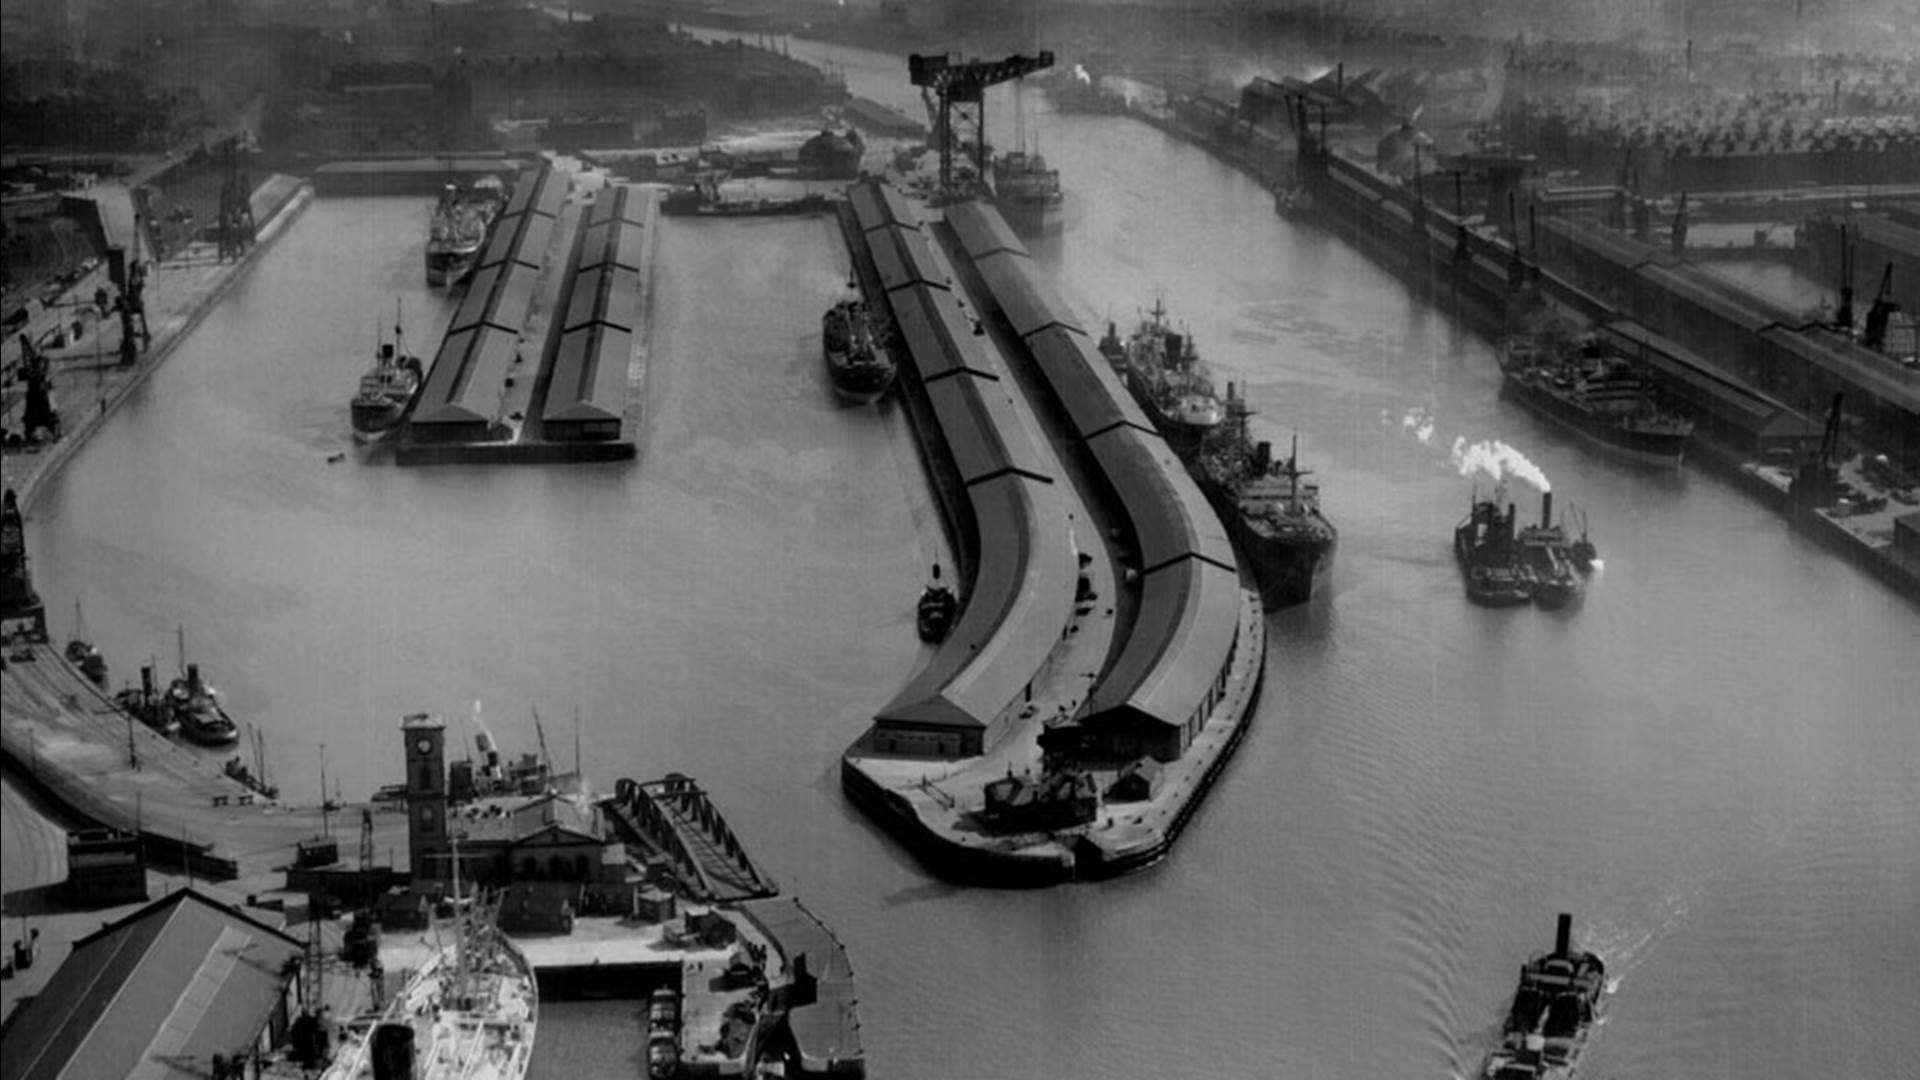 The Old Clydeside Shipyards